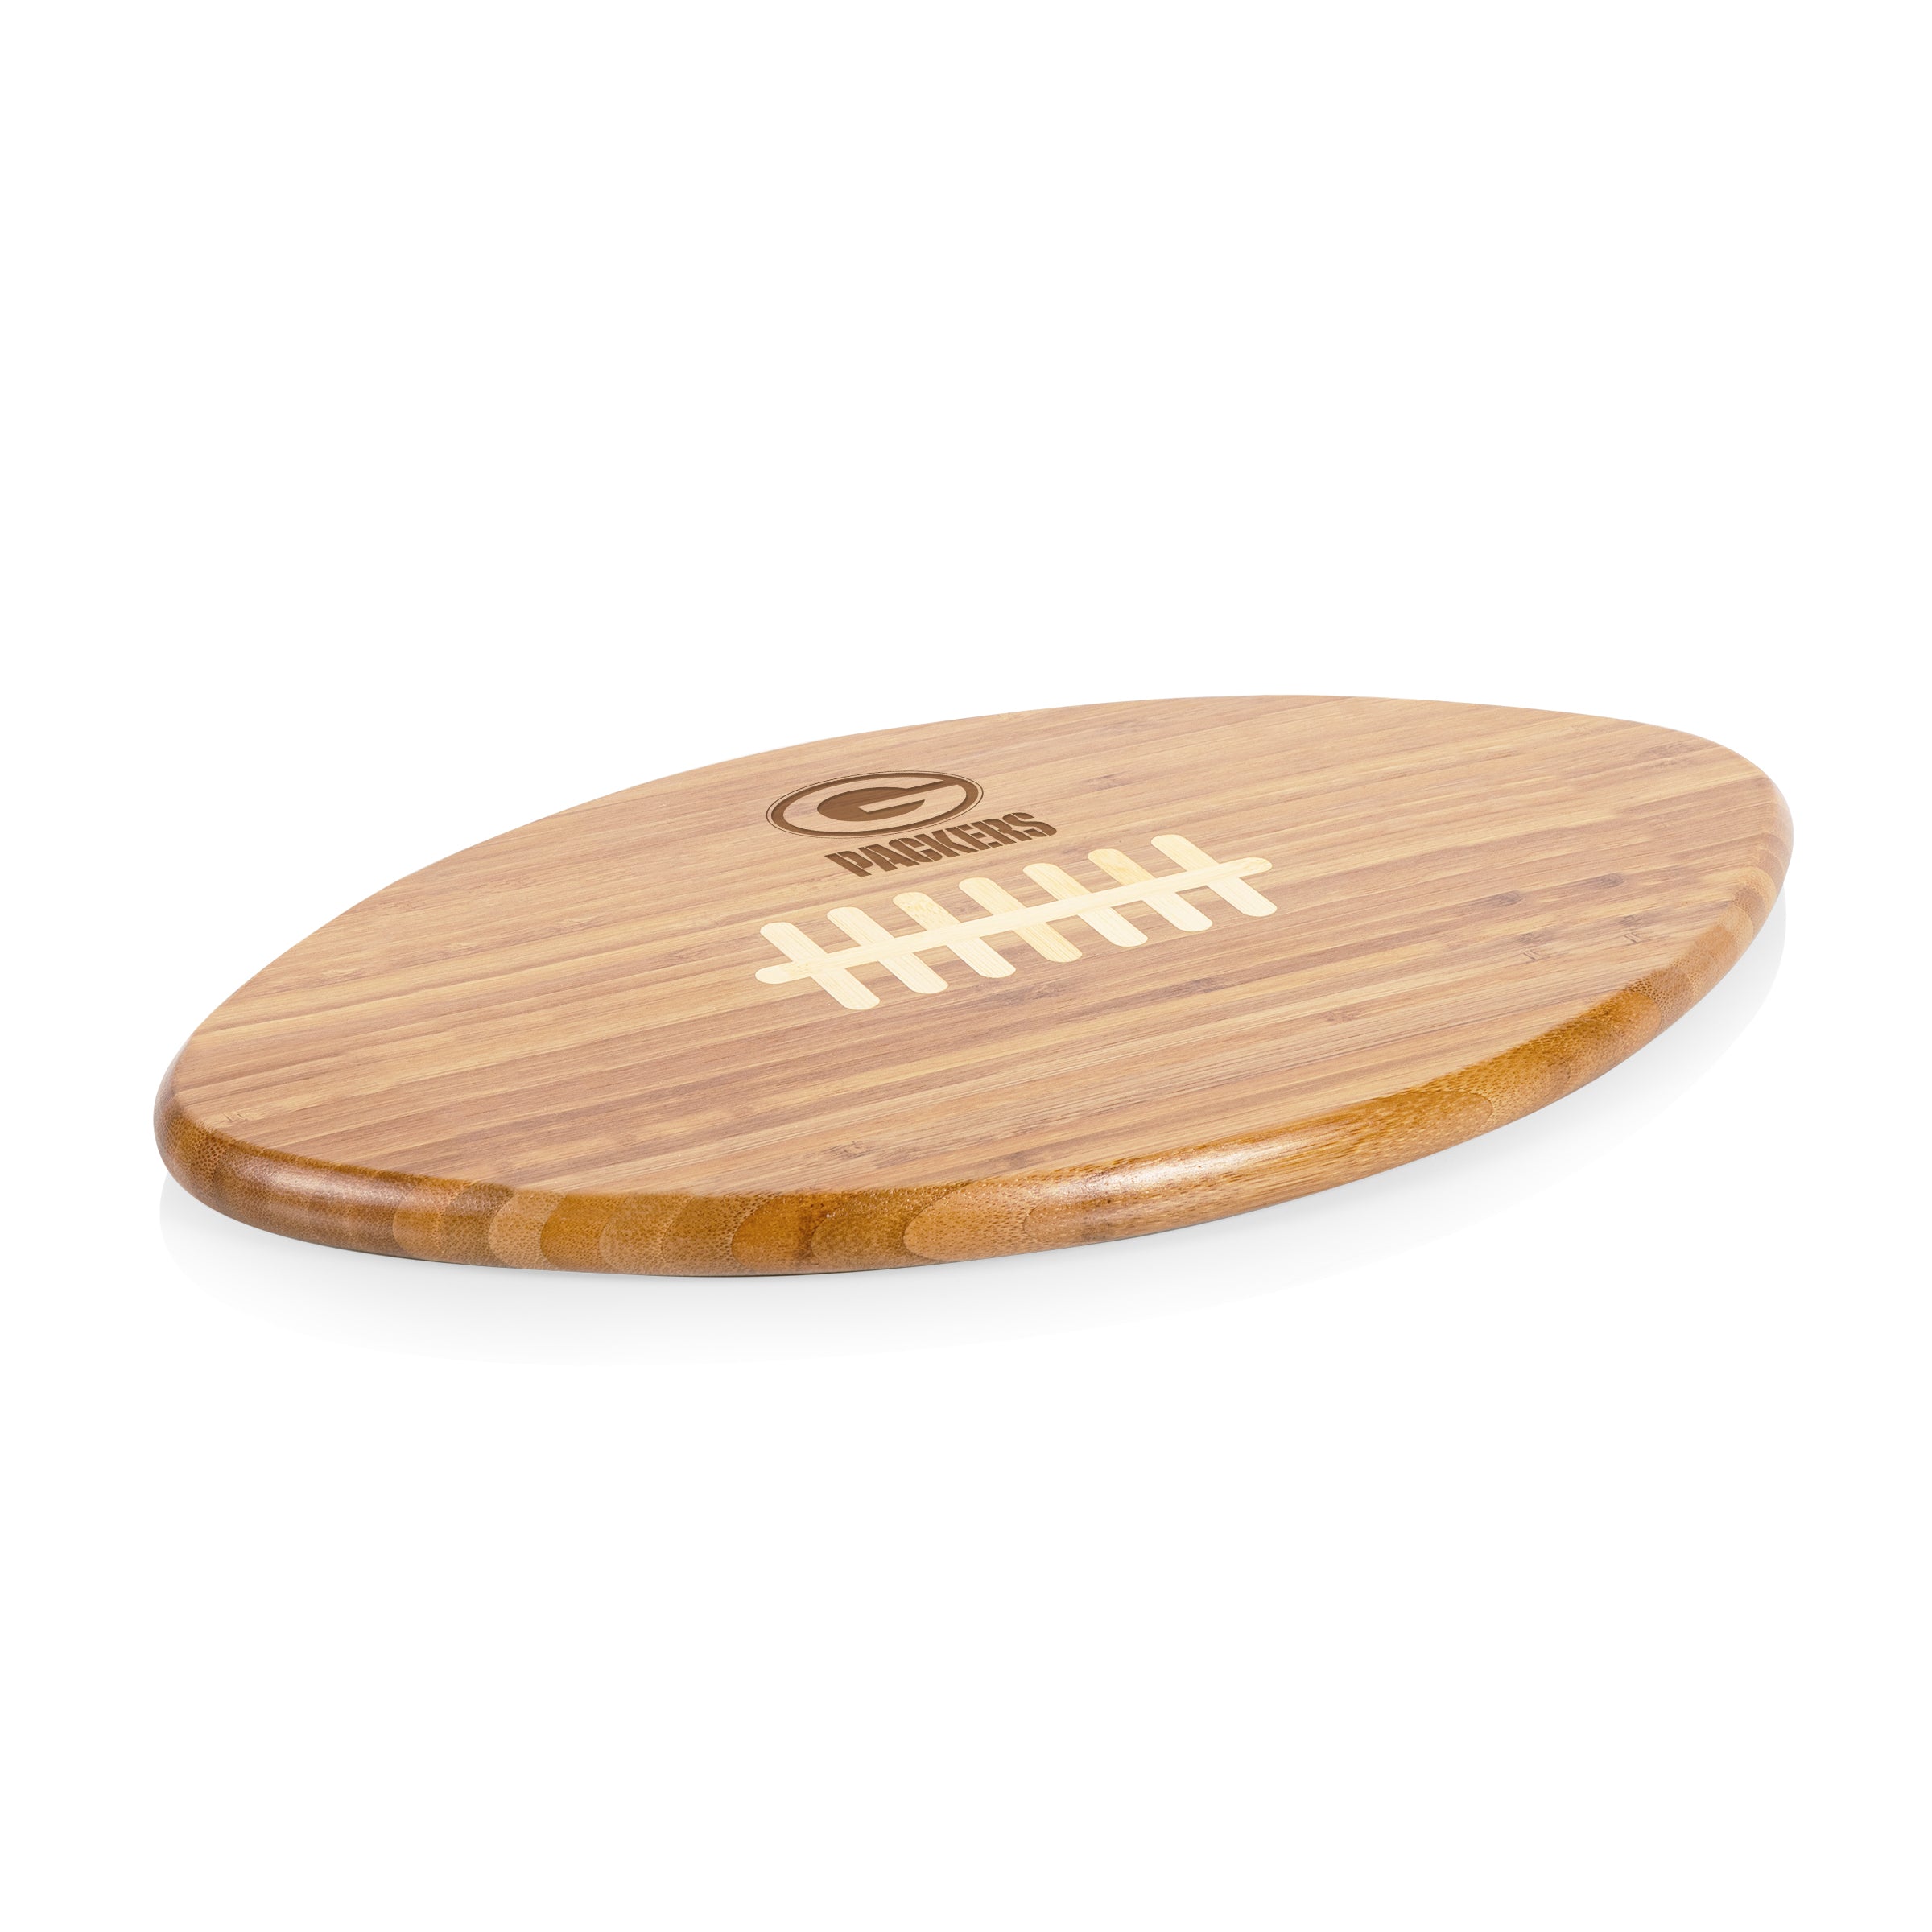 Green Bay Packers - Touchdown! Football Cutting Board & Serving Tray